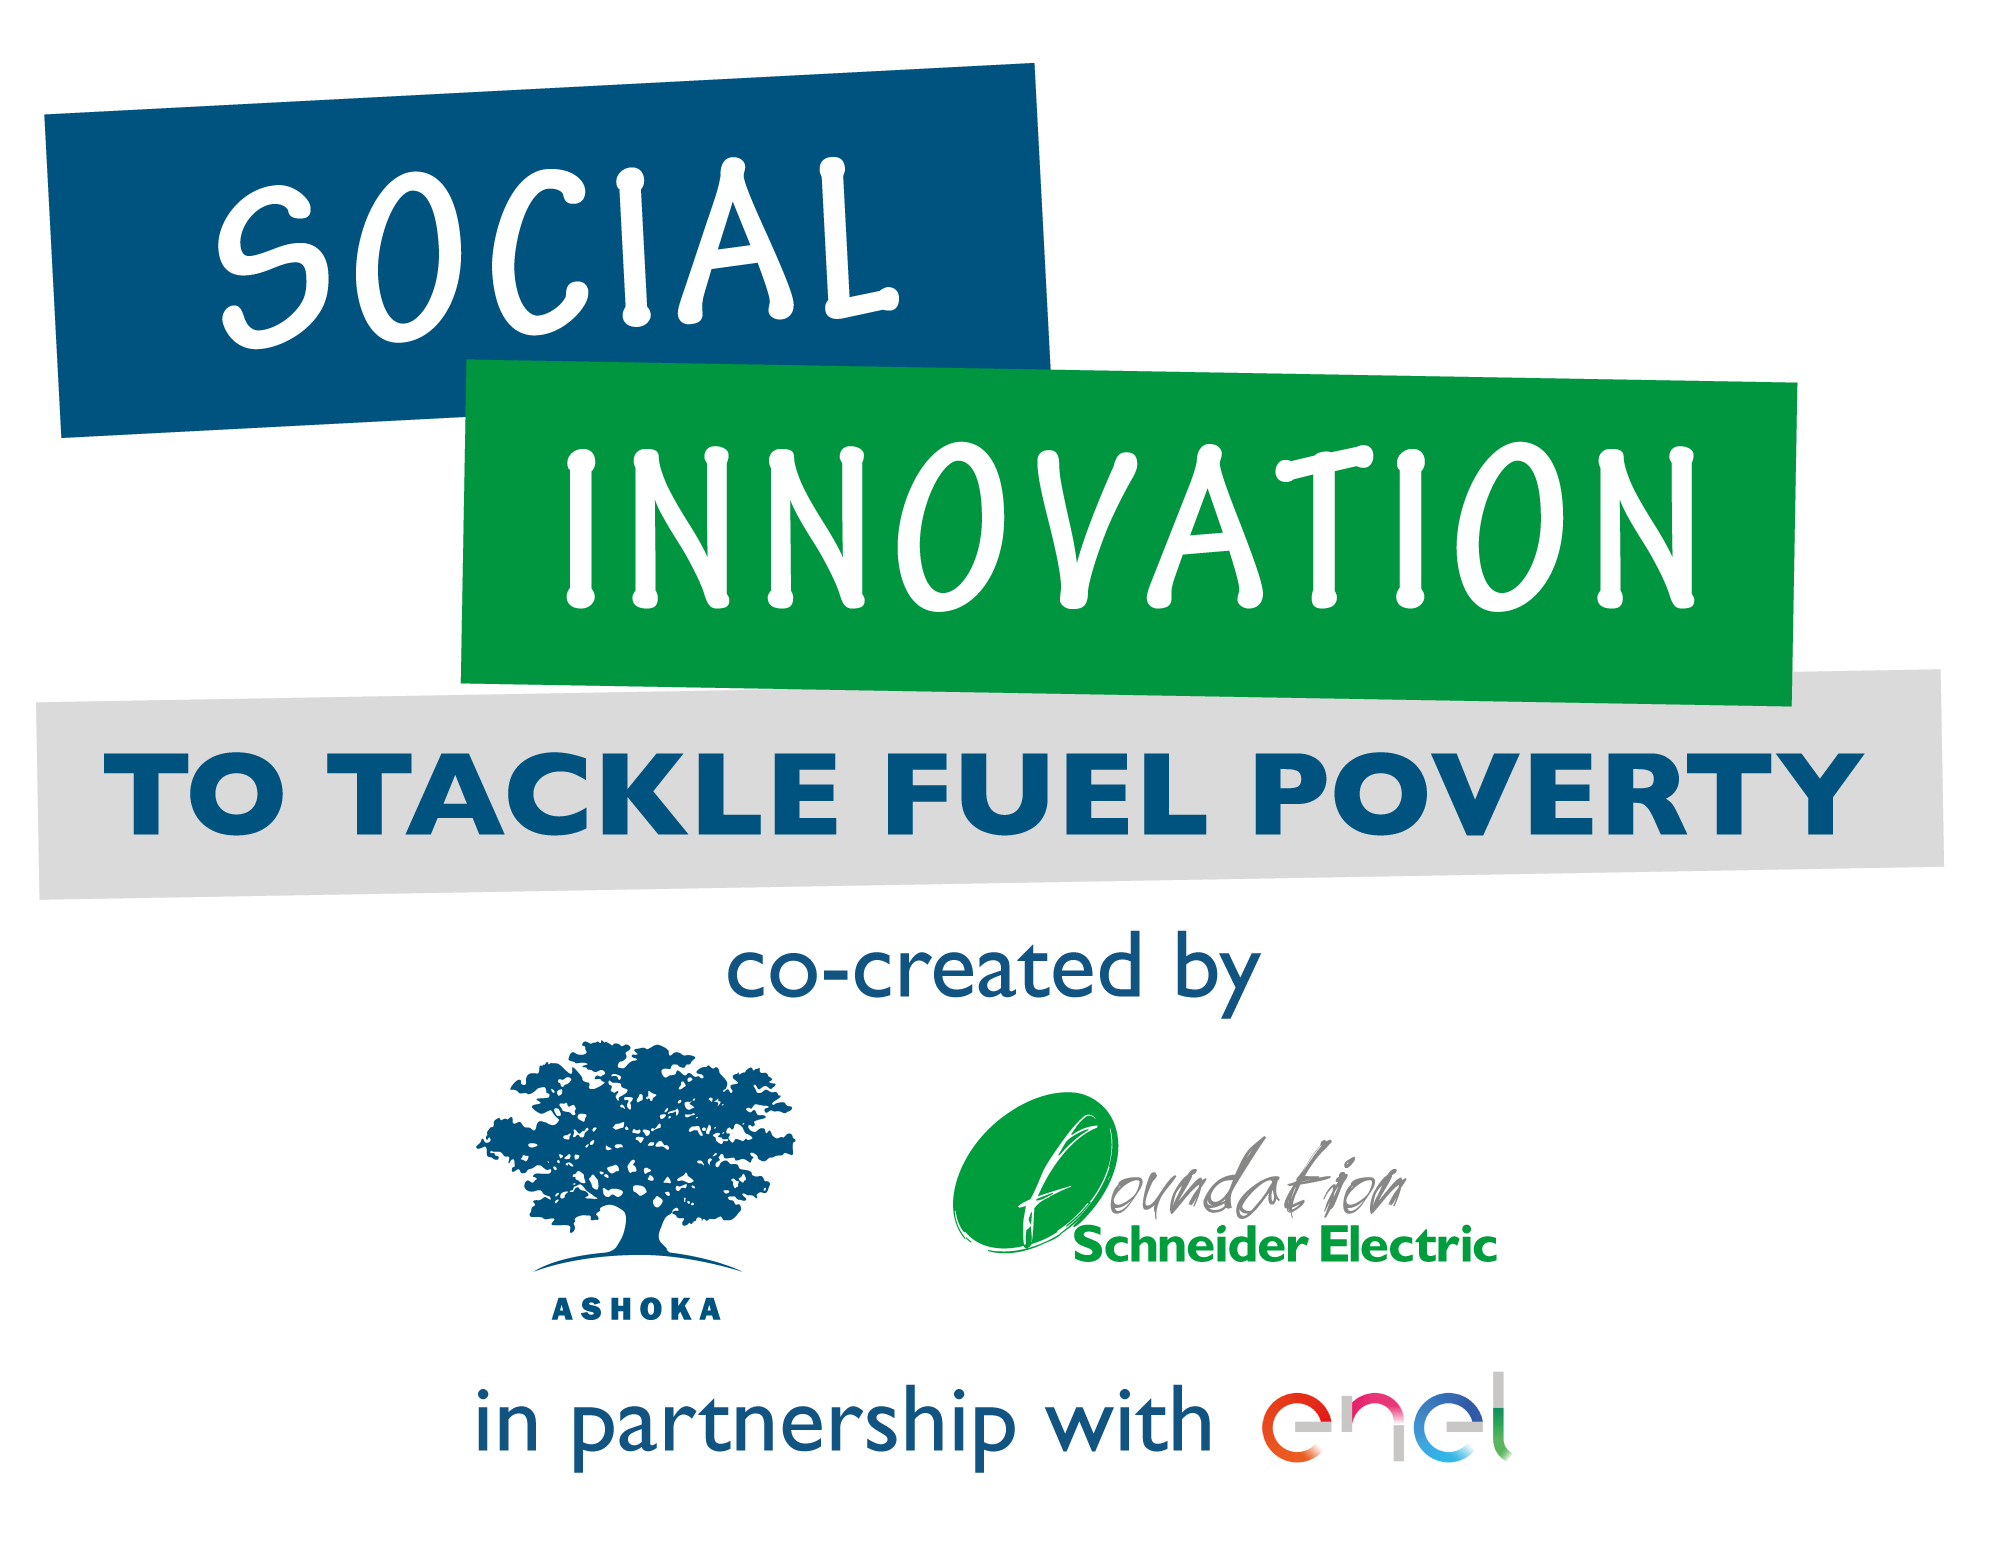 Social Innovation to Tackle Fuel Poverty